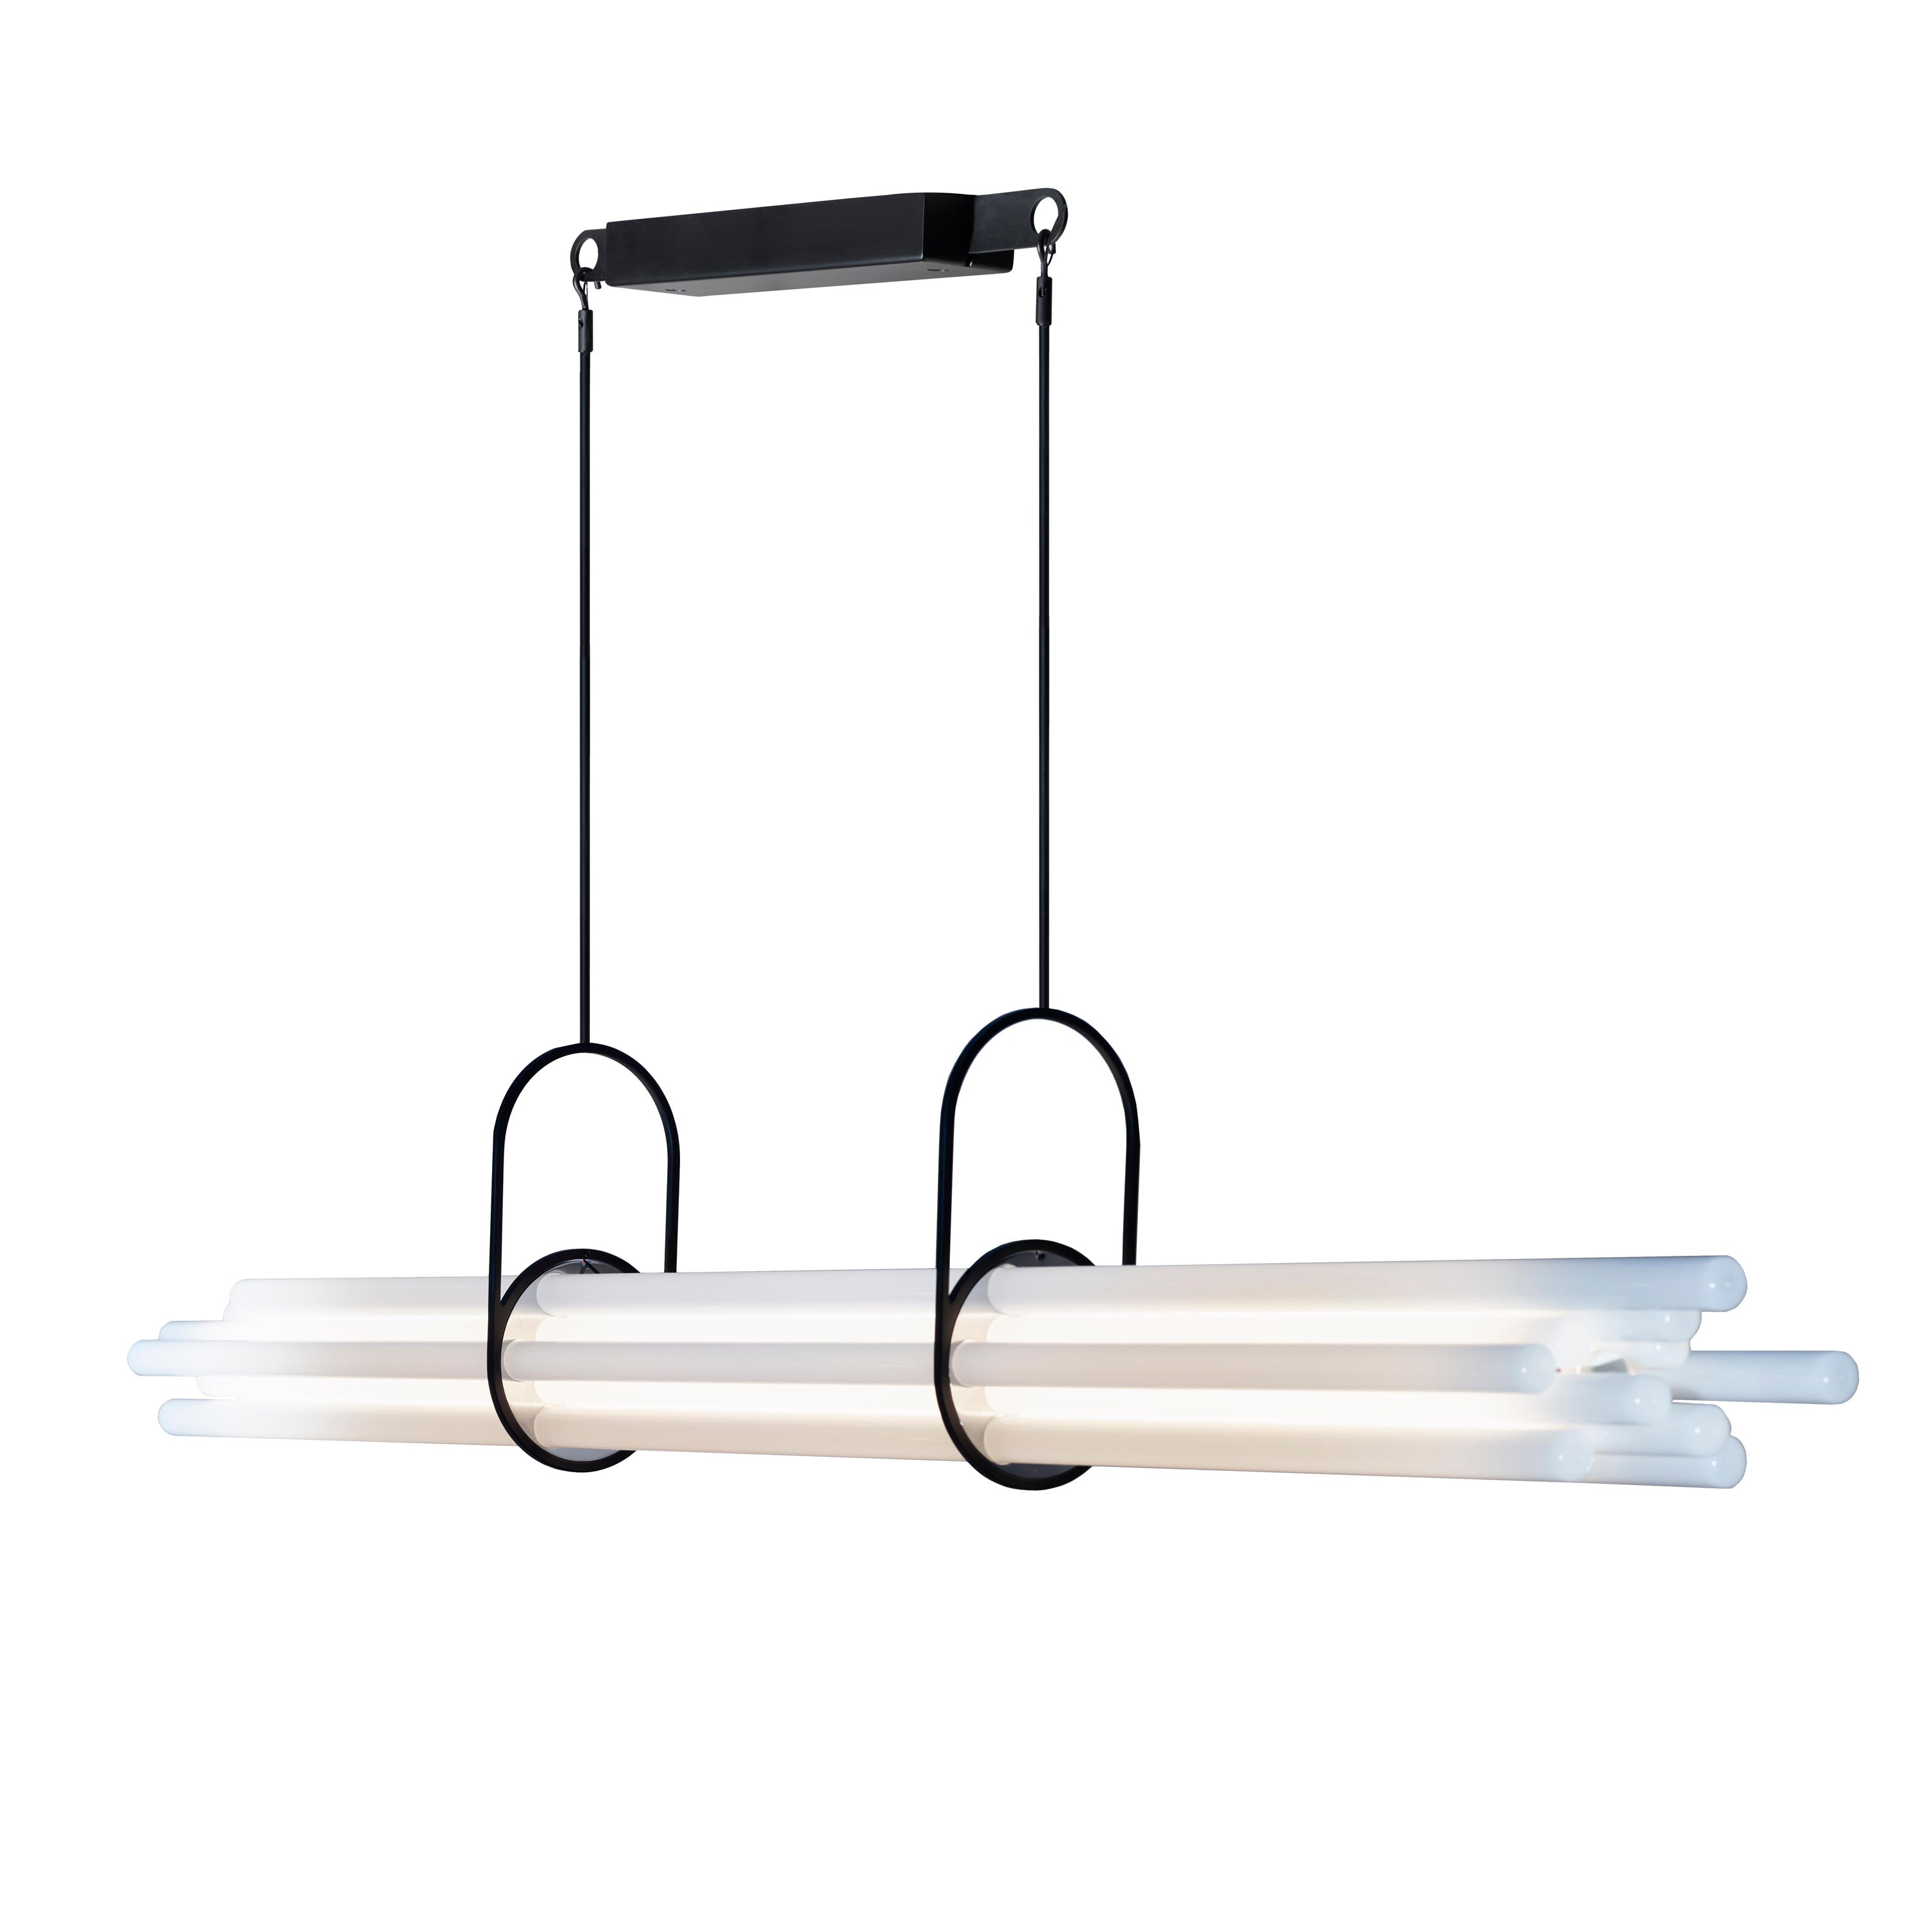 DCW Editions NL12 Pendant Lamp in Black Glass and Aluminum by Sebastian Summa For Sale